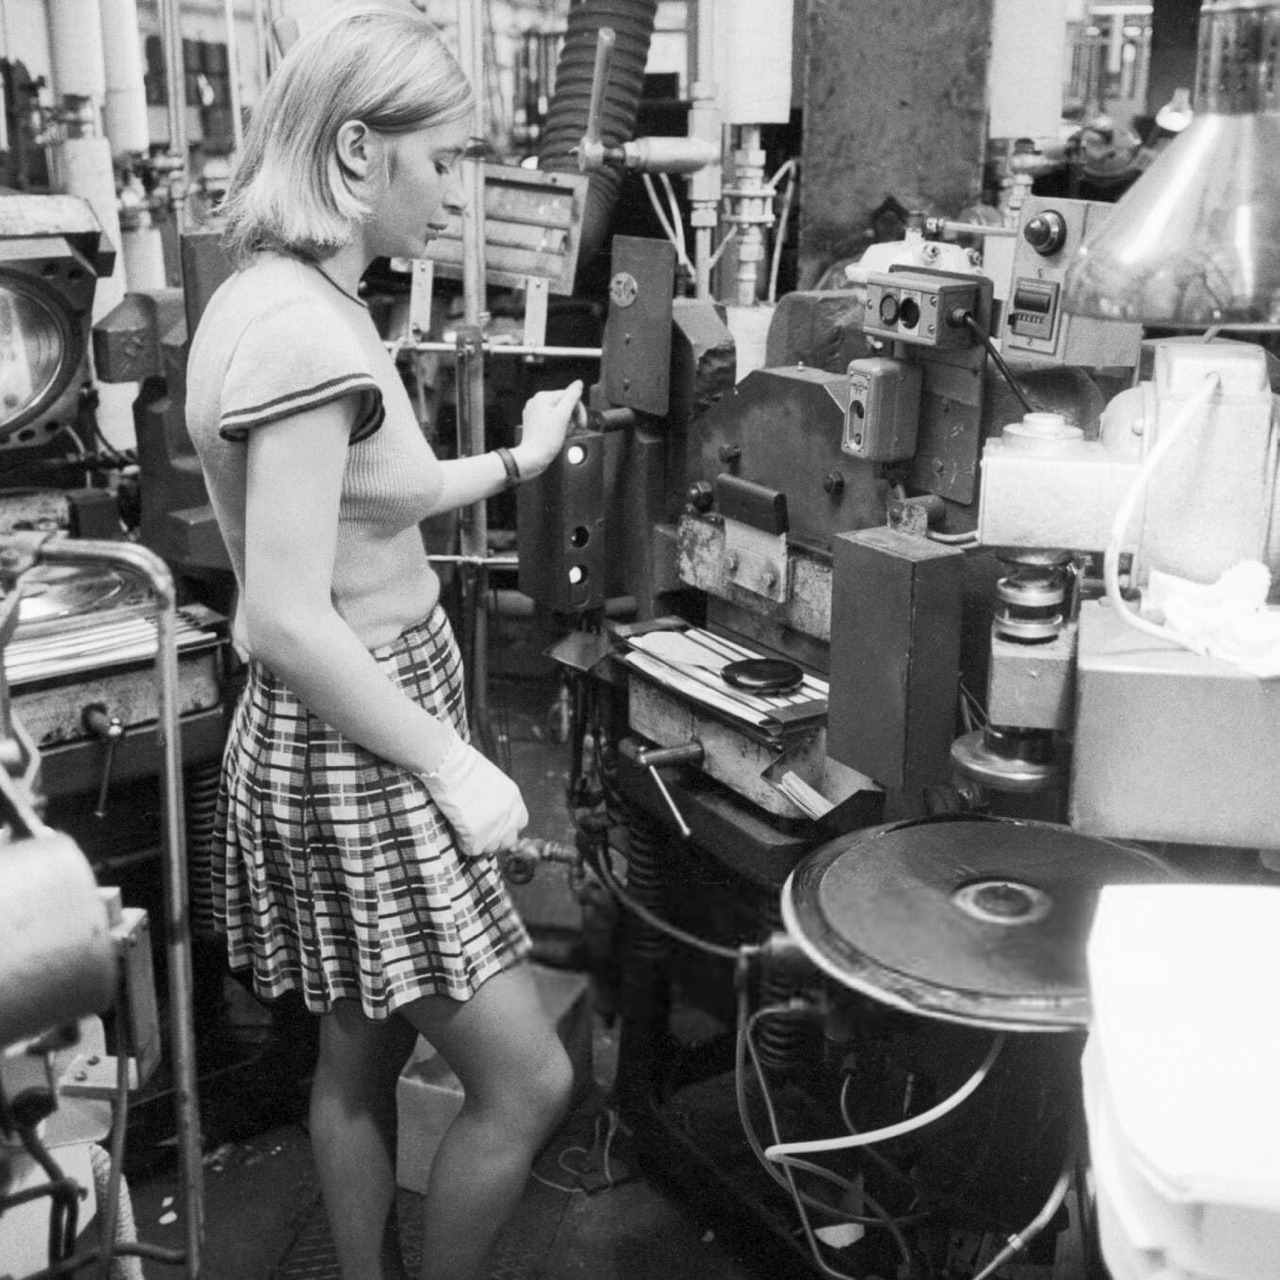 Super Seventies — An employee checks the quality of a vinyl record...